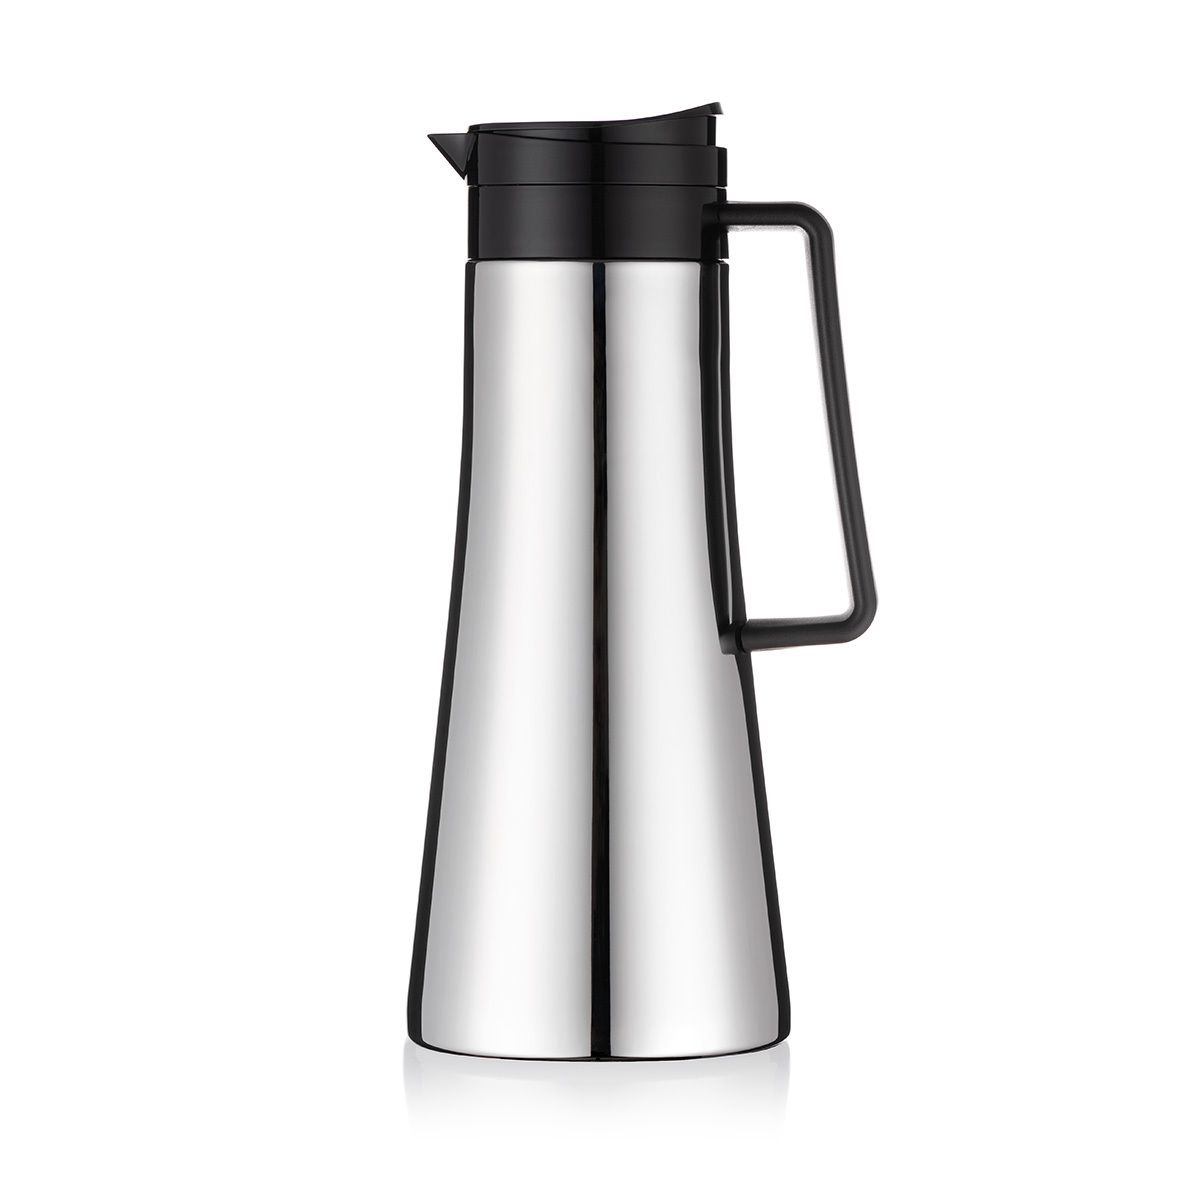 Bodum Bistro Thermo Jug: What's Brewing #35 